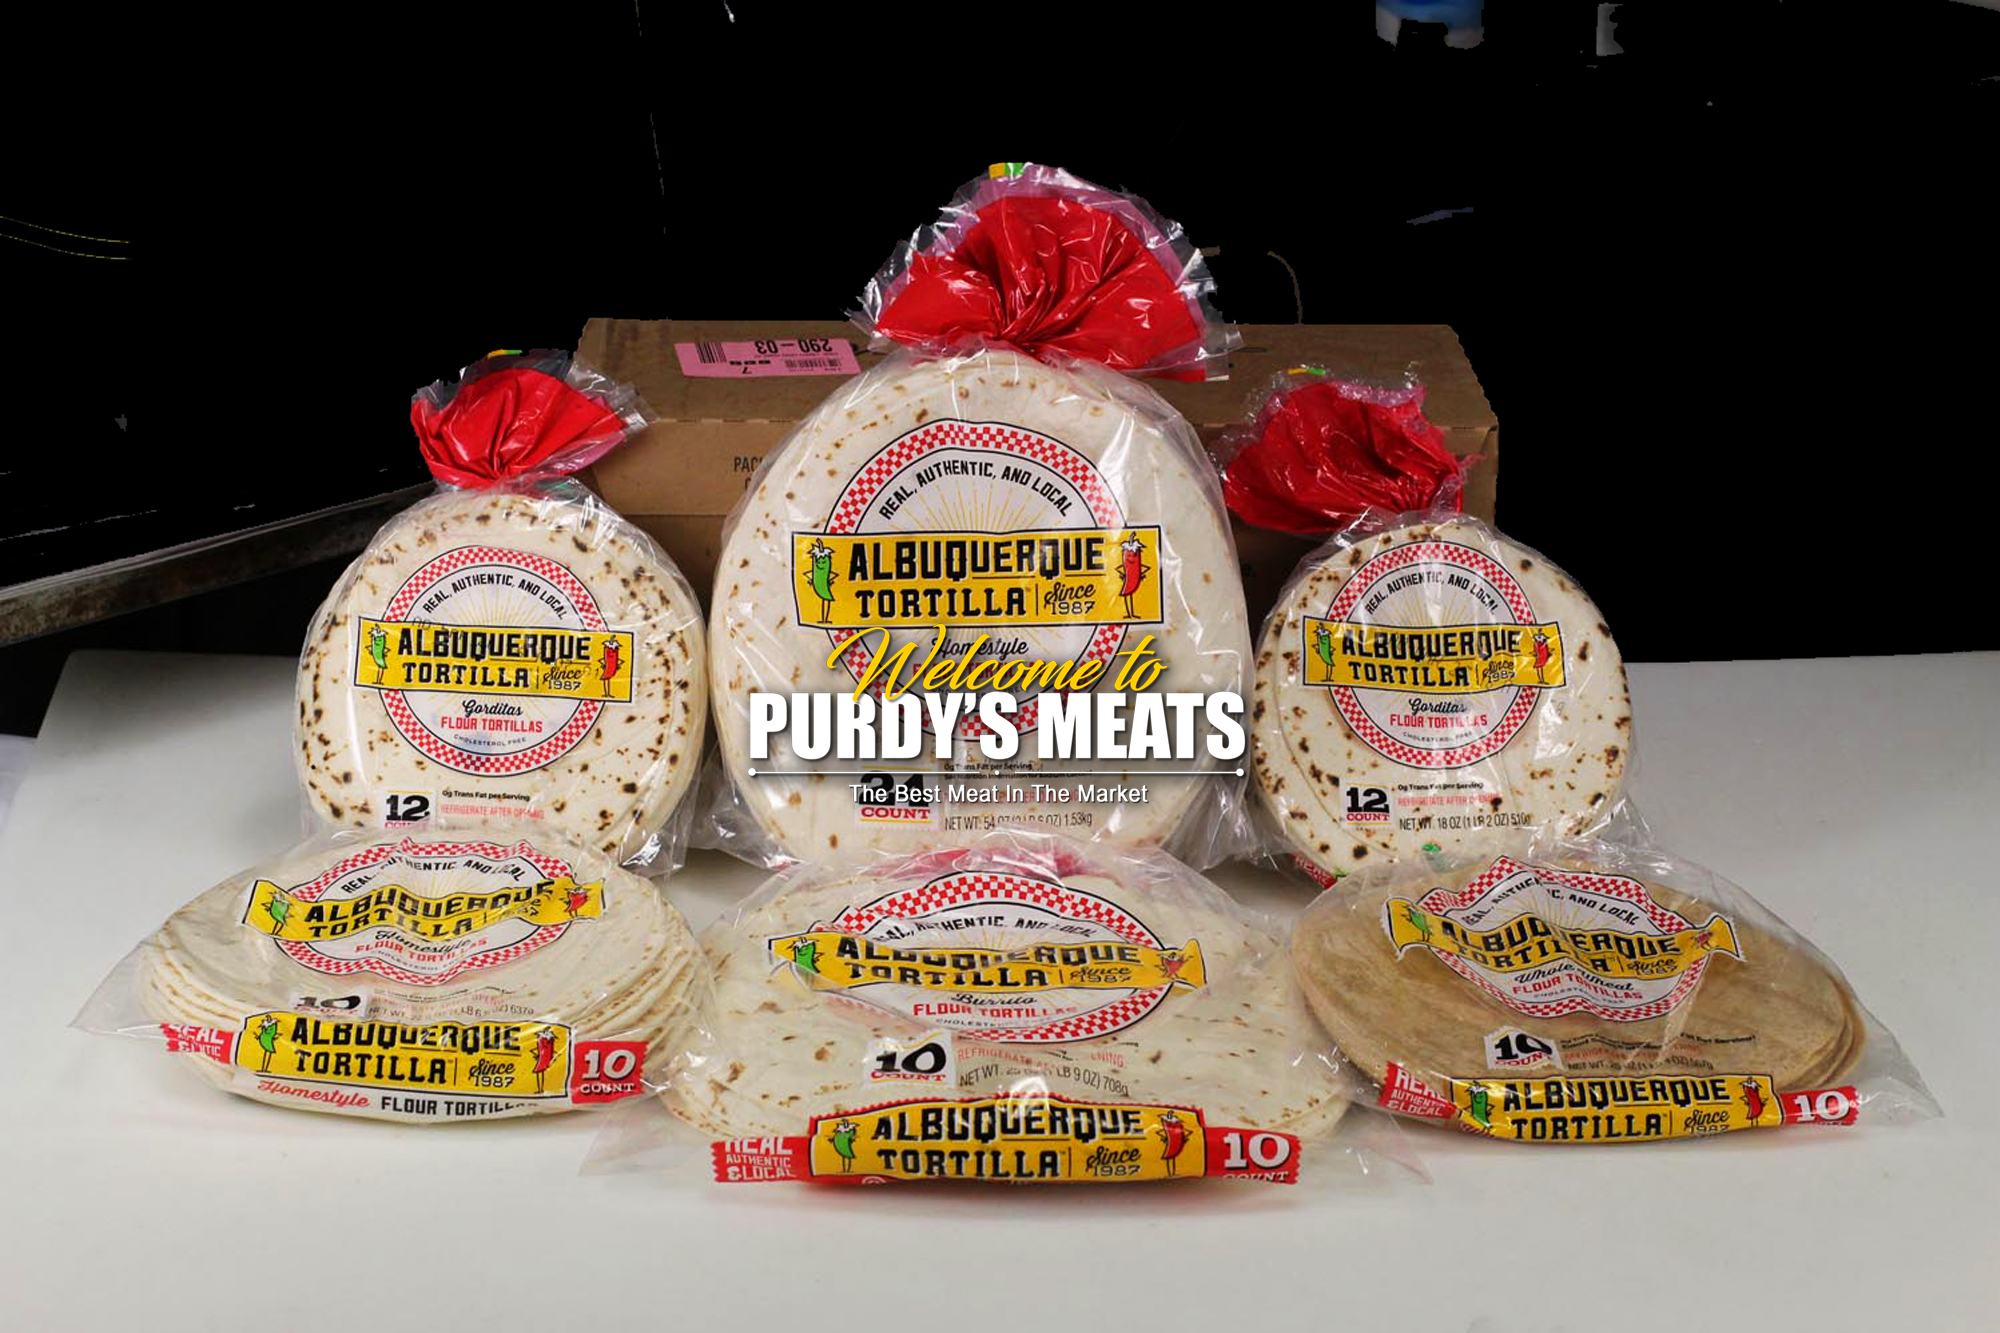 This banner image shows the Tortillas New Mexico Food Product of the Purdy's Quality Meats